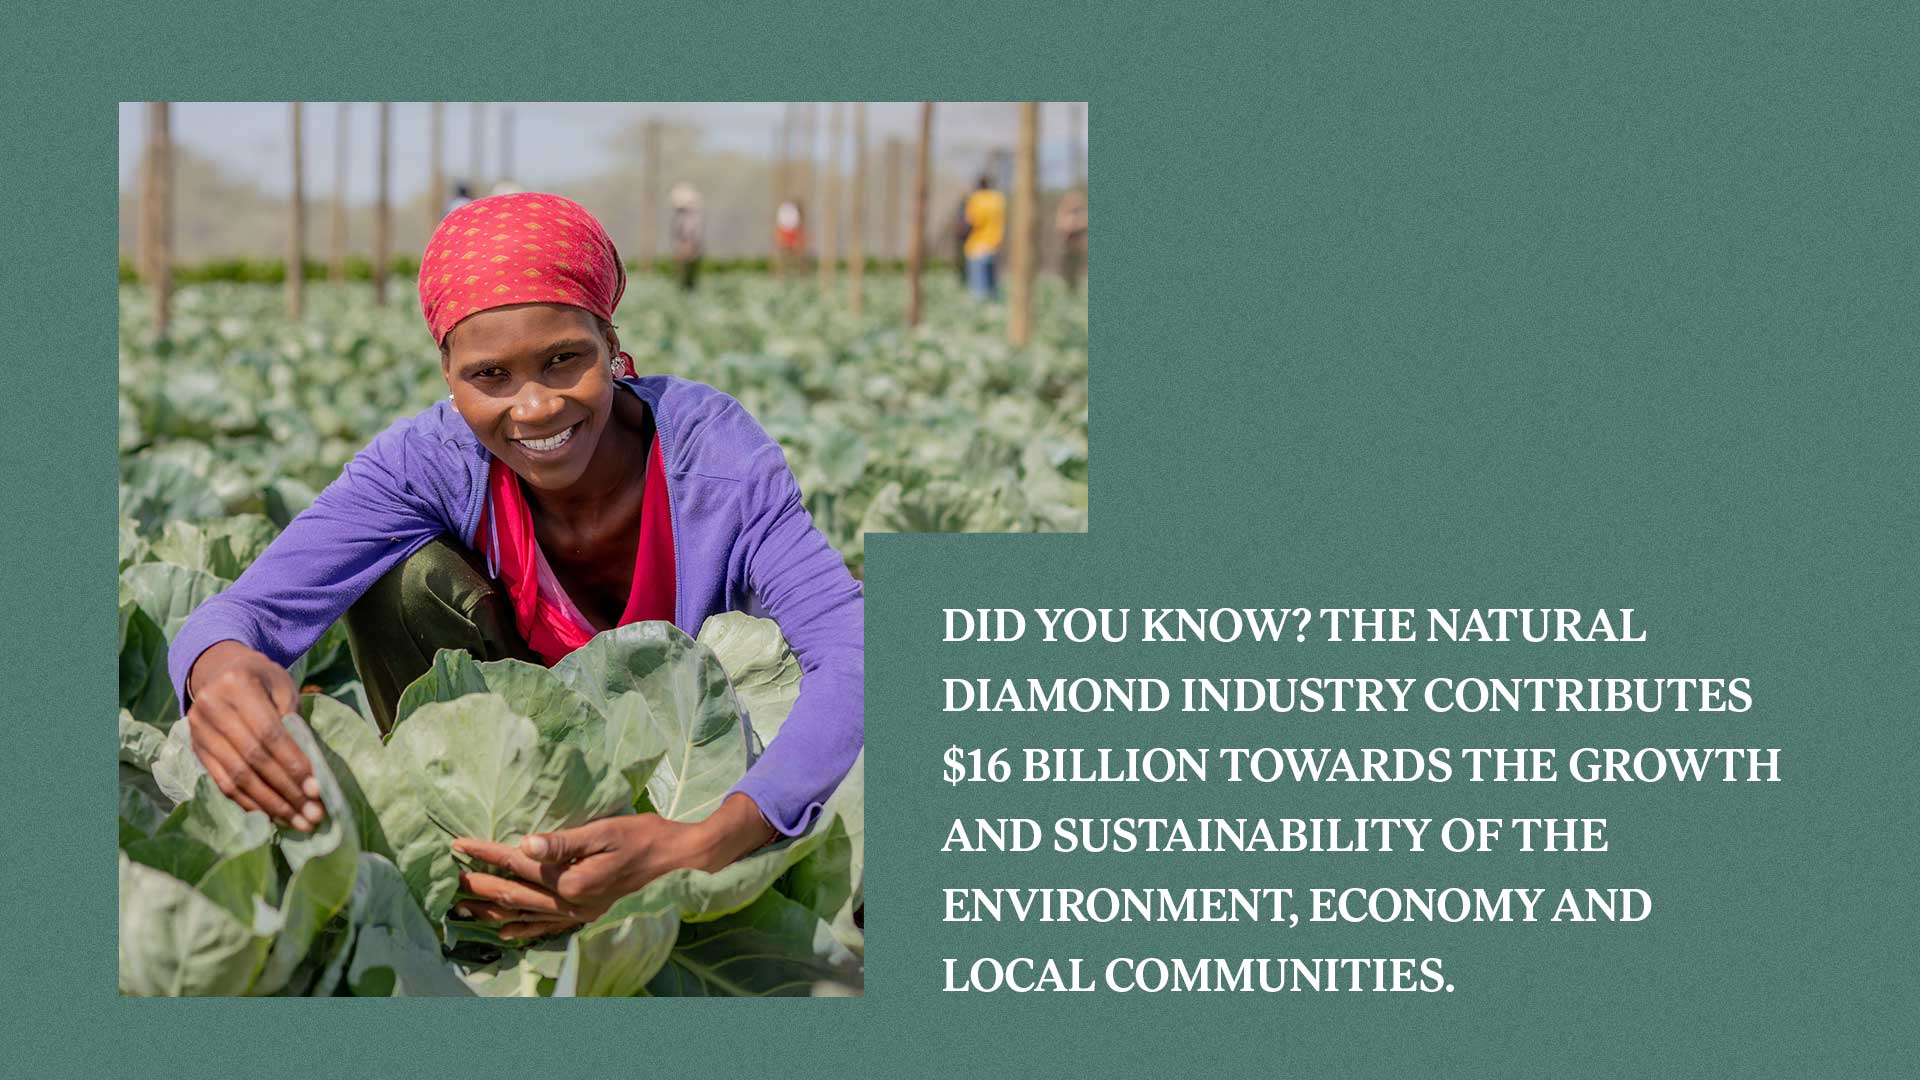 Natural diamond’s contribution towards growth and sustainability 